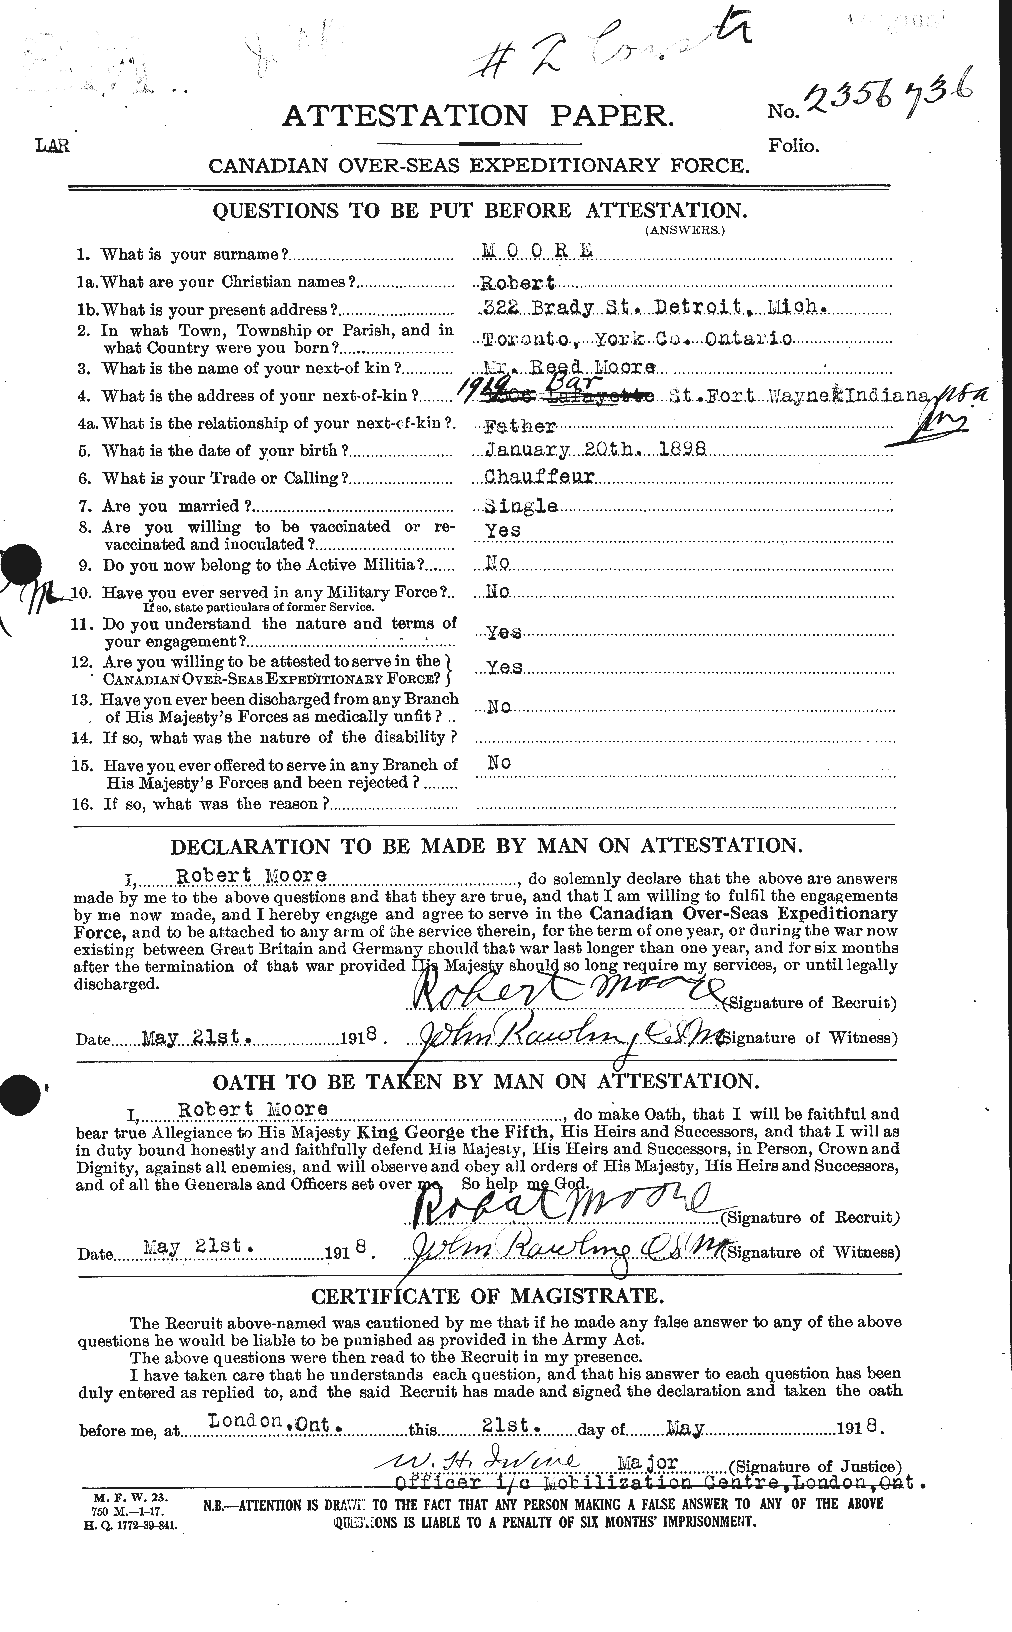 Personnel Records of the First World War - CEF 503550a